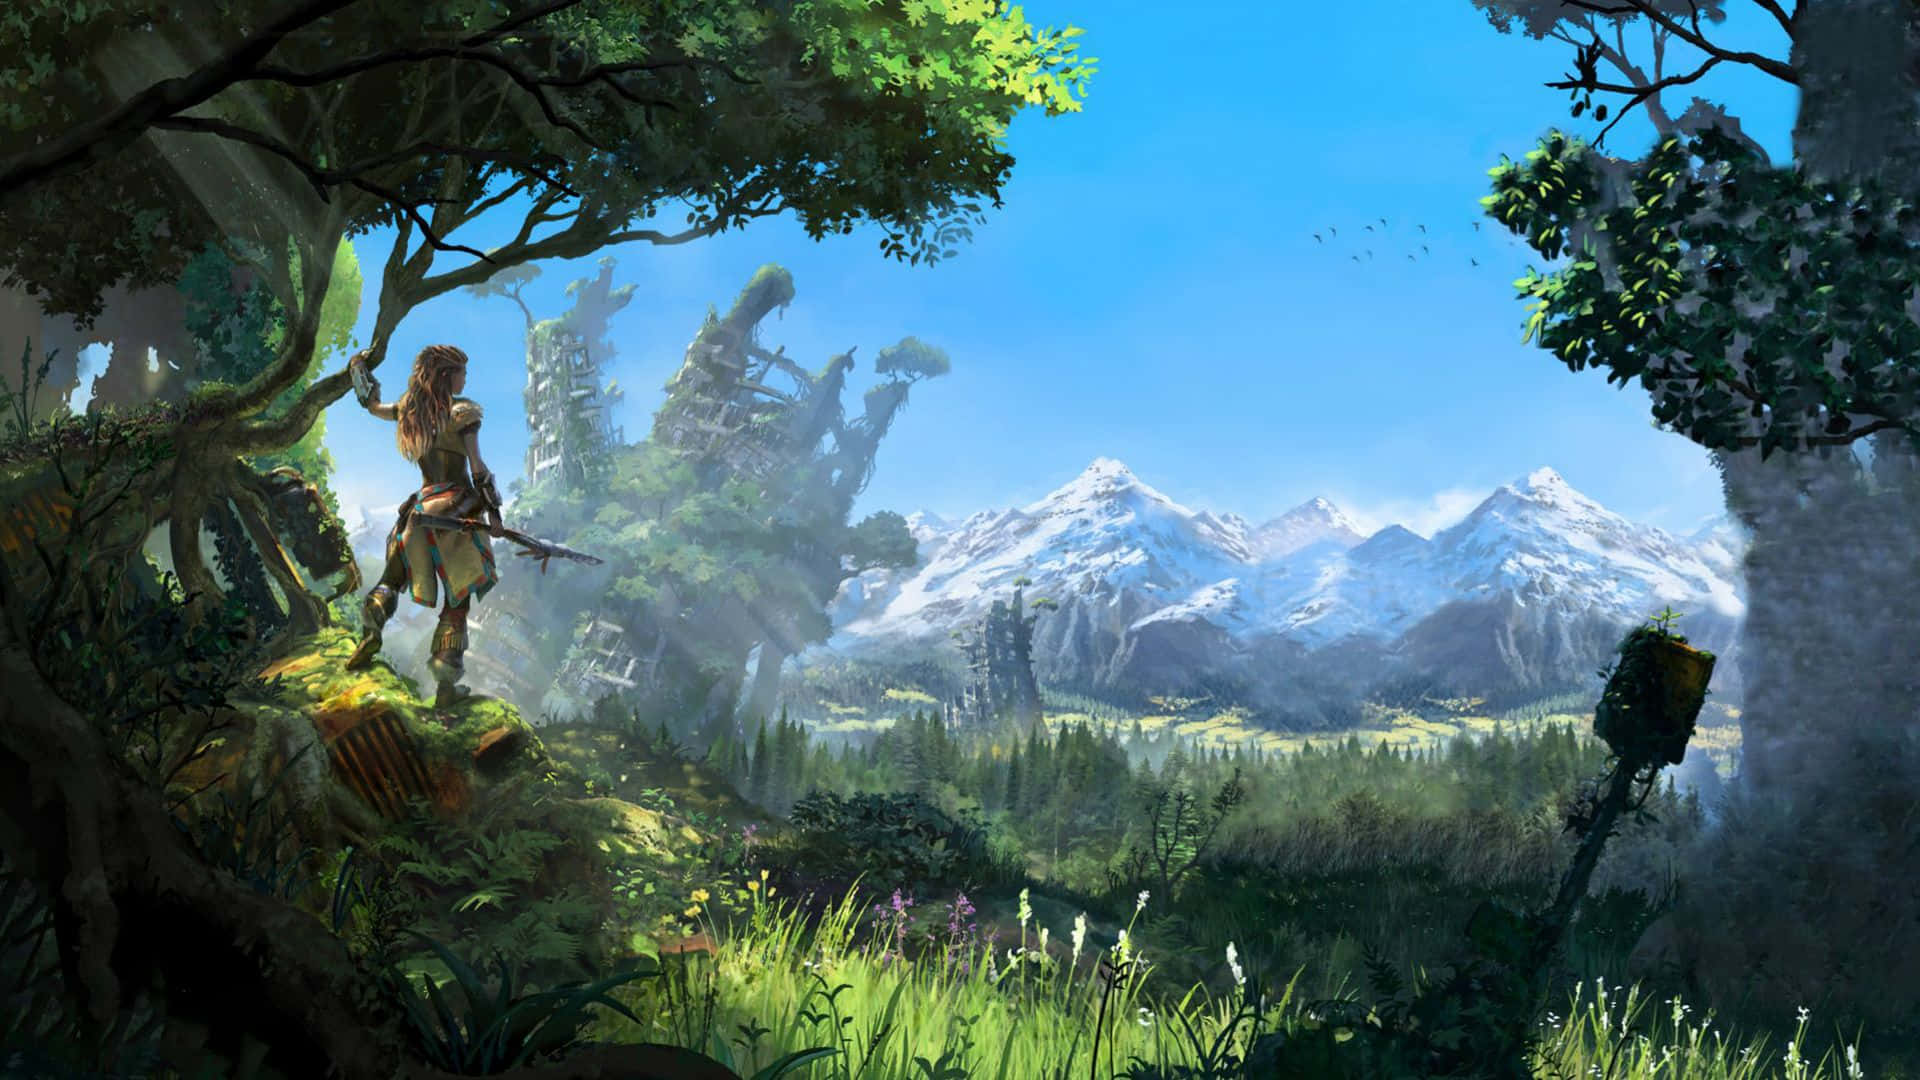 Discover an amazing open-world game! Wallpaper